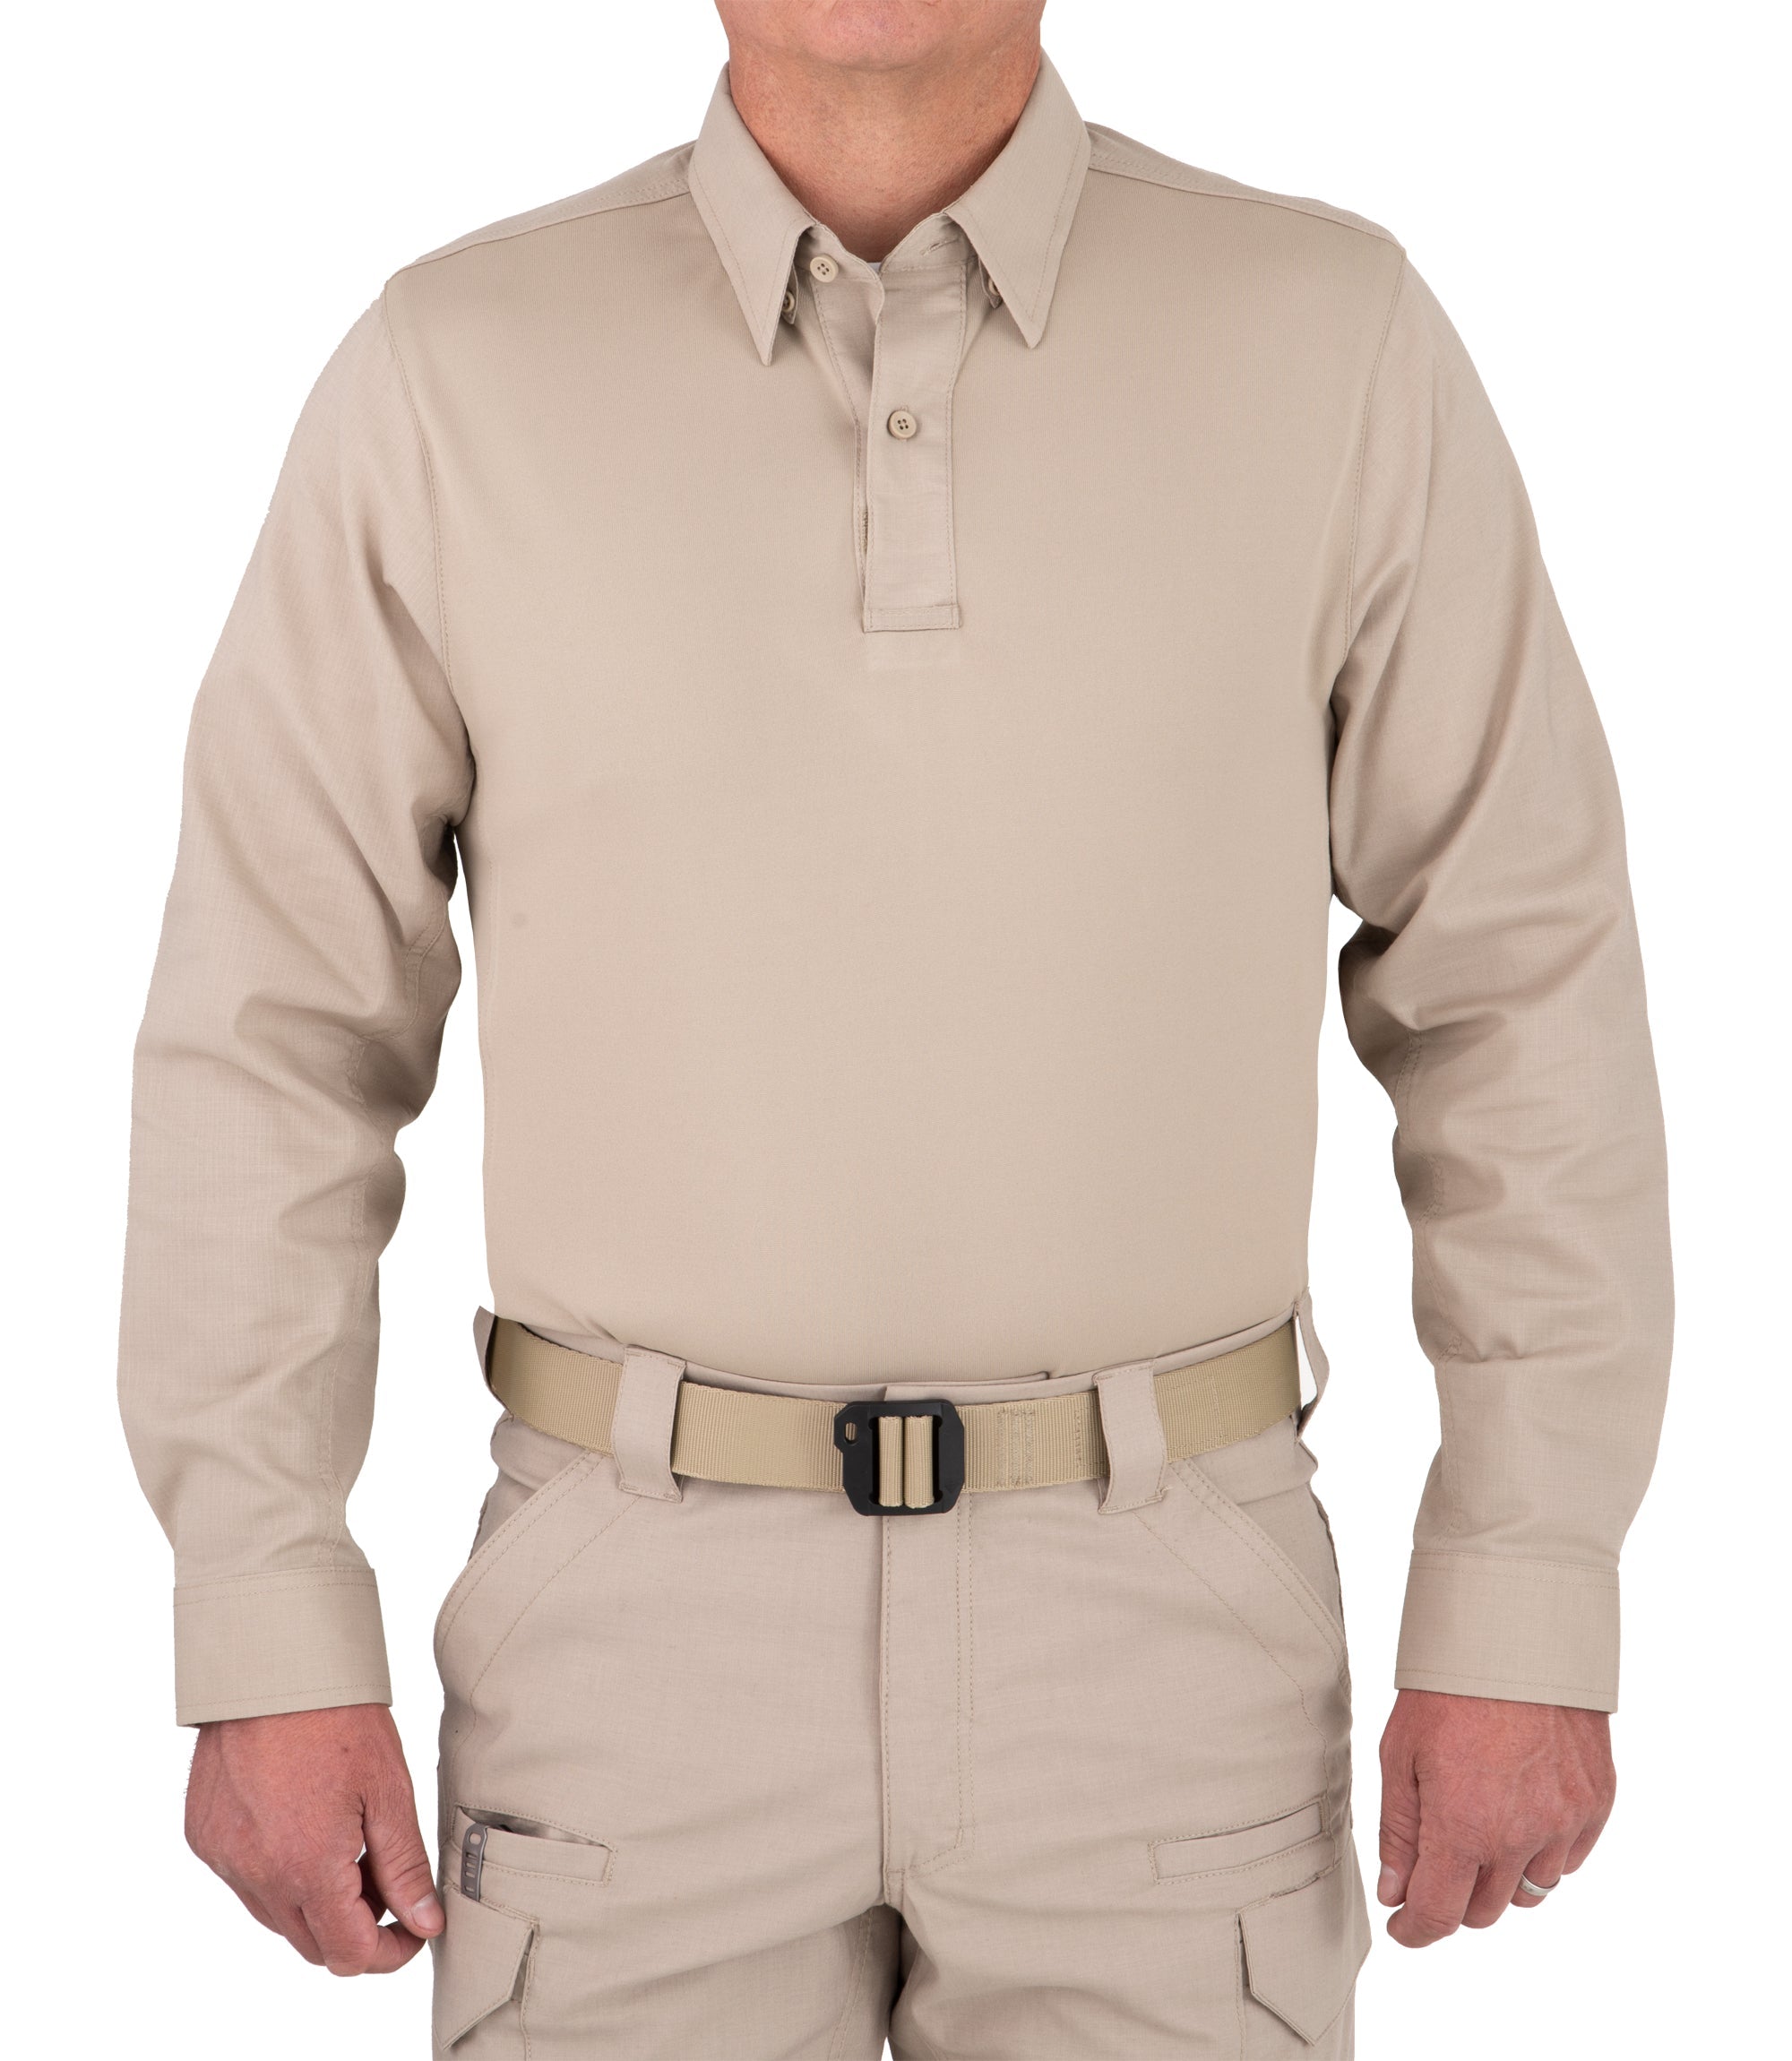 First Tactical - Men's V2 Pro Performance L/S Shirt - Silver Tan – Western  Tactical Uniform and Gear